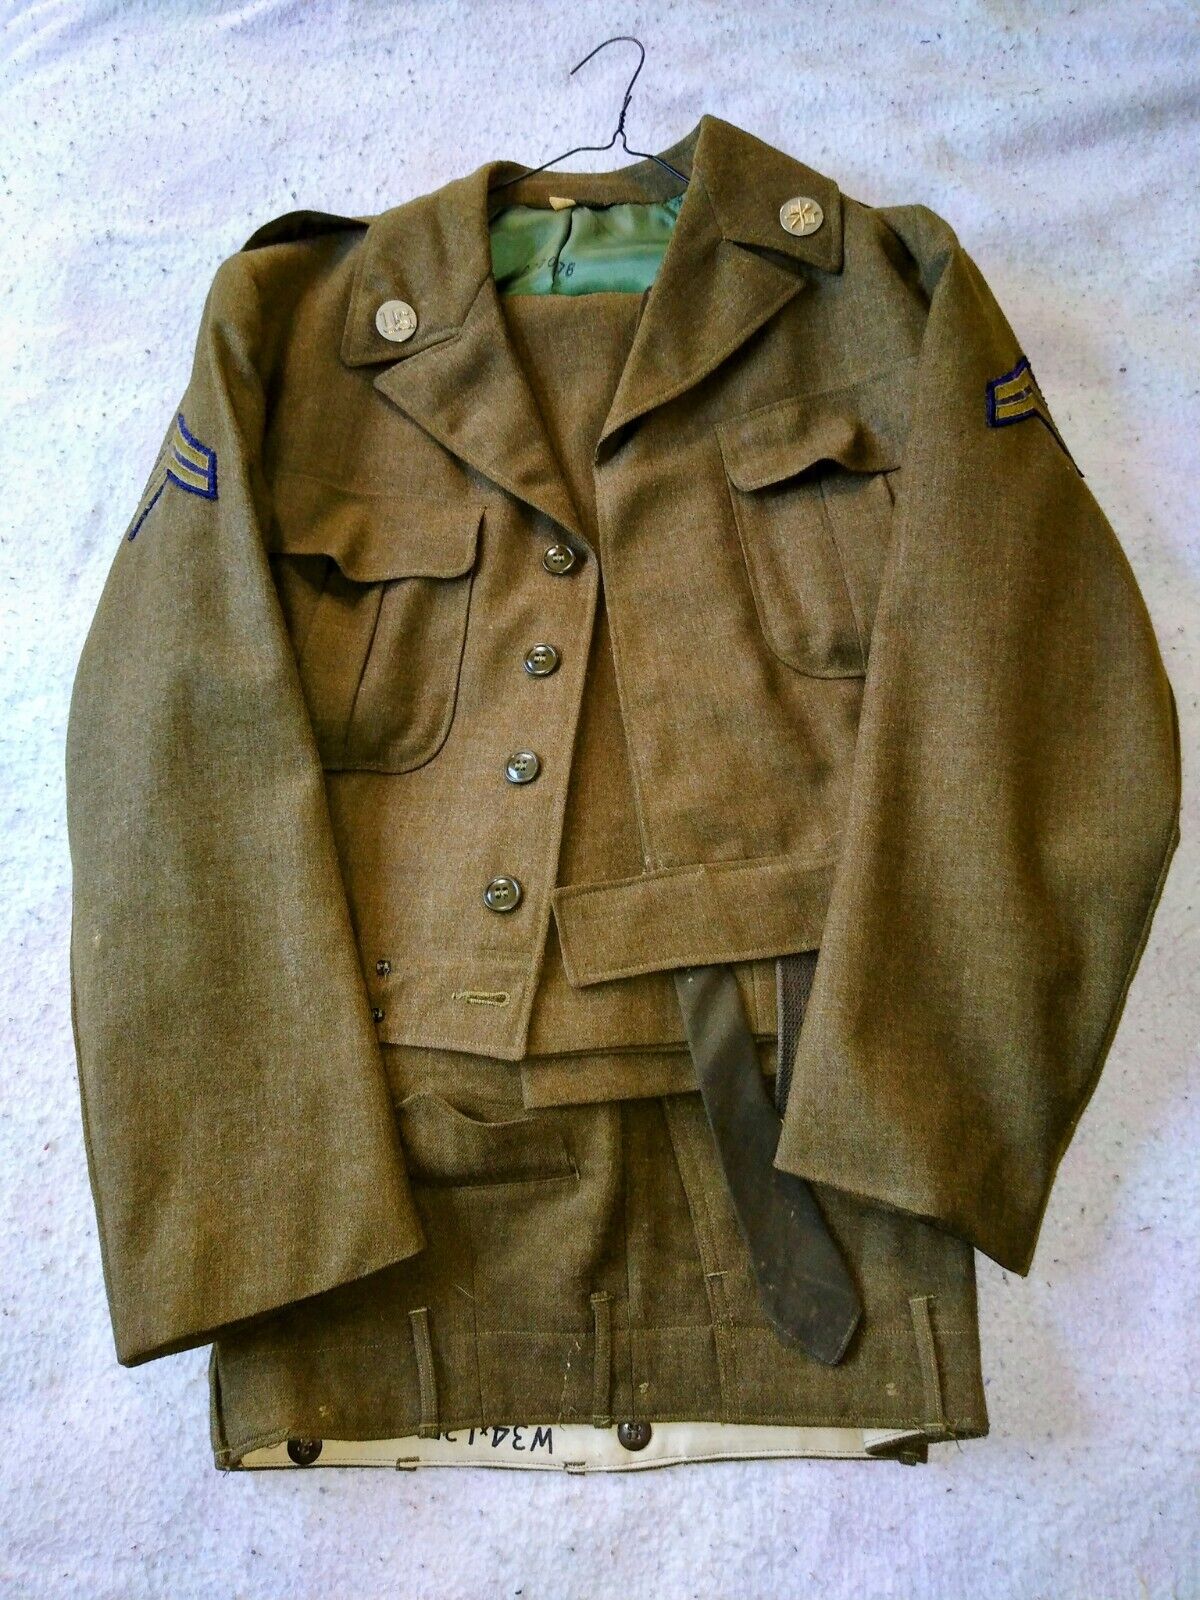 1950s U.S. 8th Army Uniform Ike Jacket, Pants, Belt, Tie, Orders, Patches. Pins